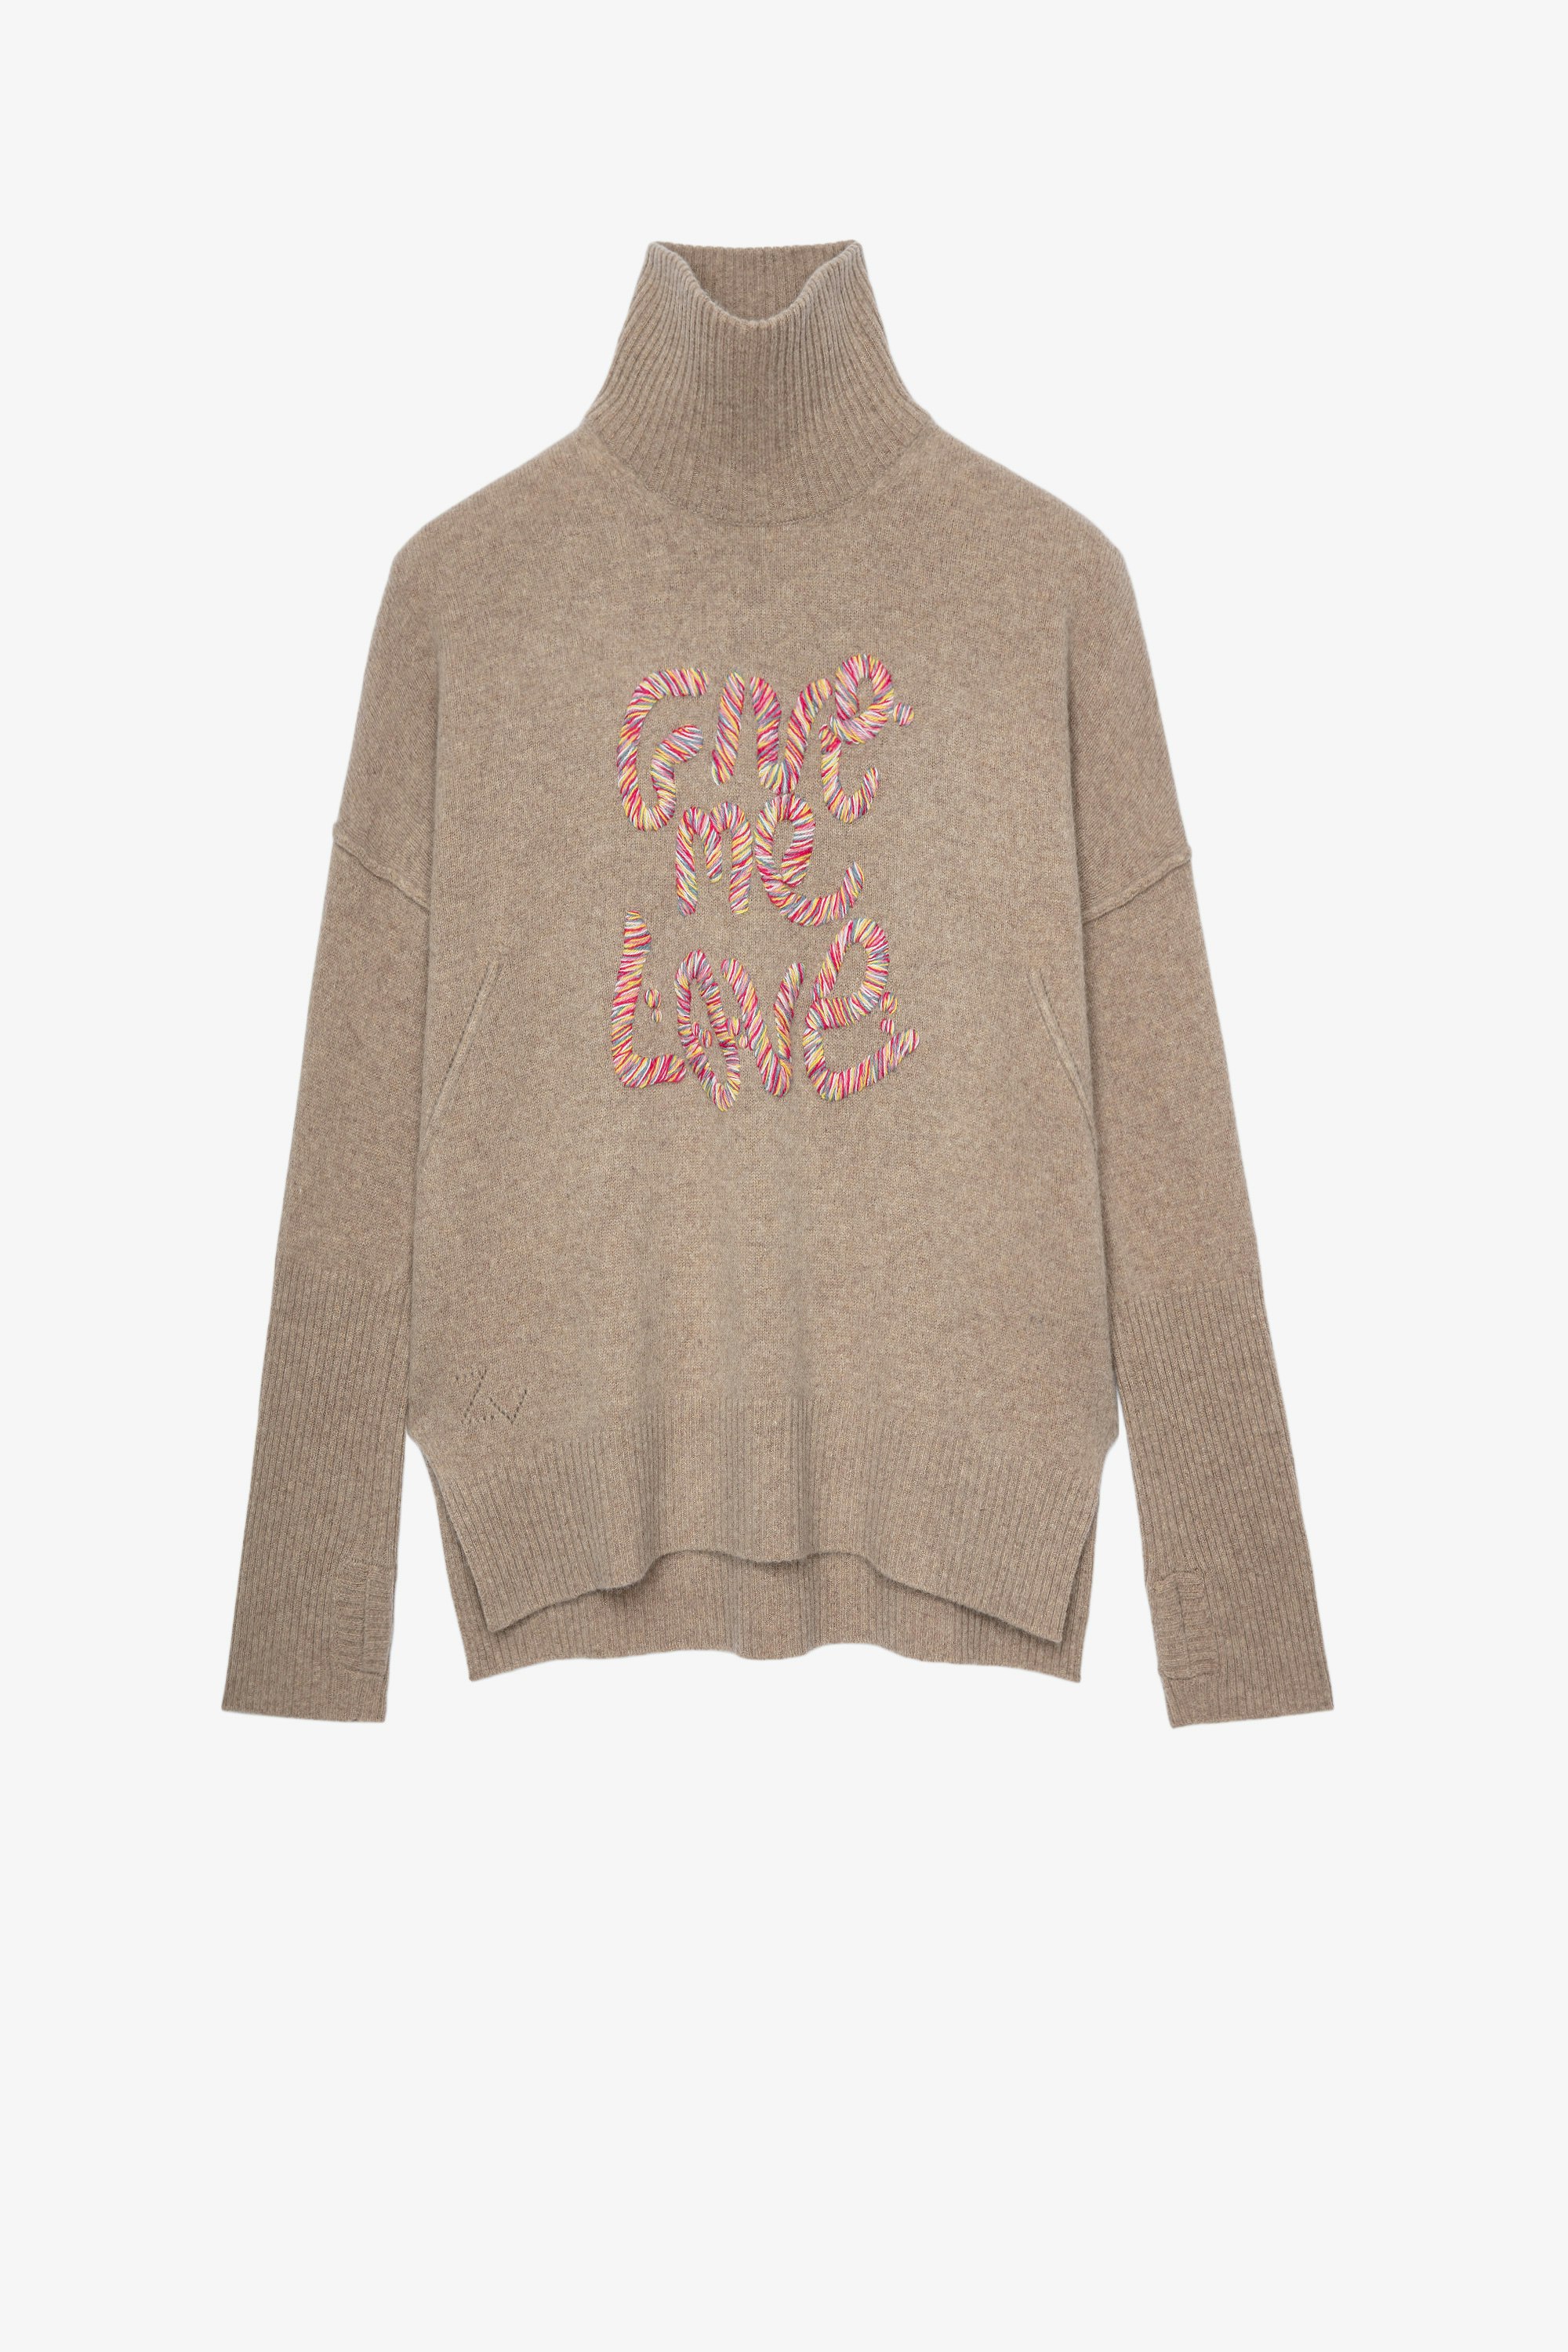 Alma Give Me Love Jumper Beige knit jumper with “Give Me Love” slogan